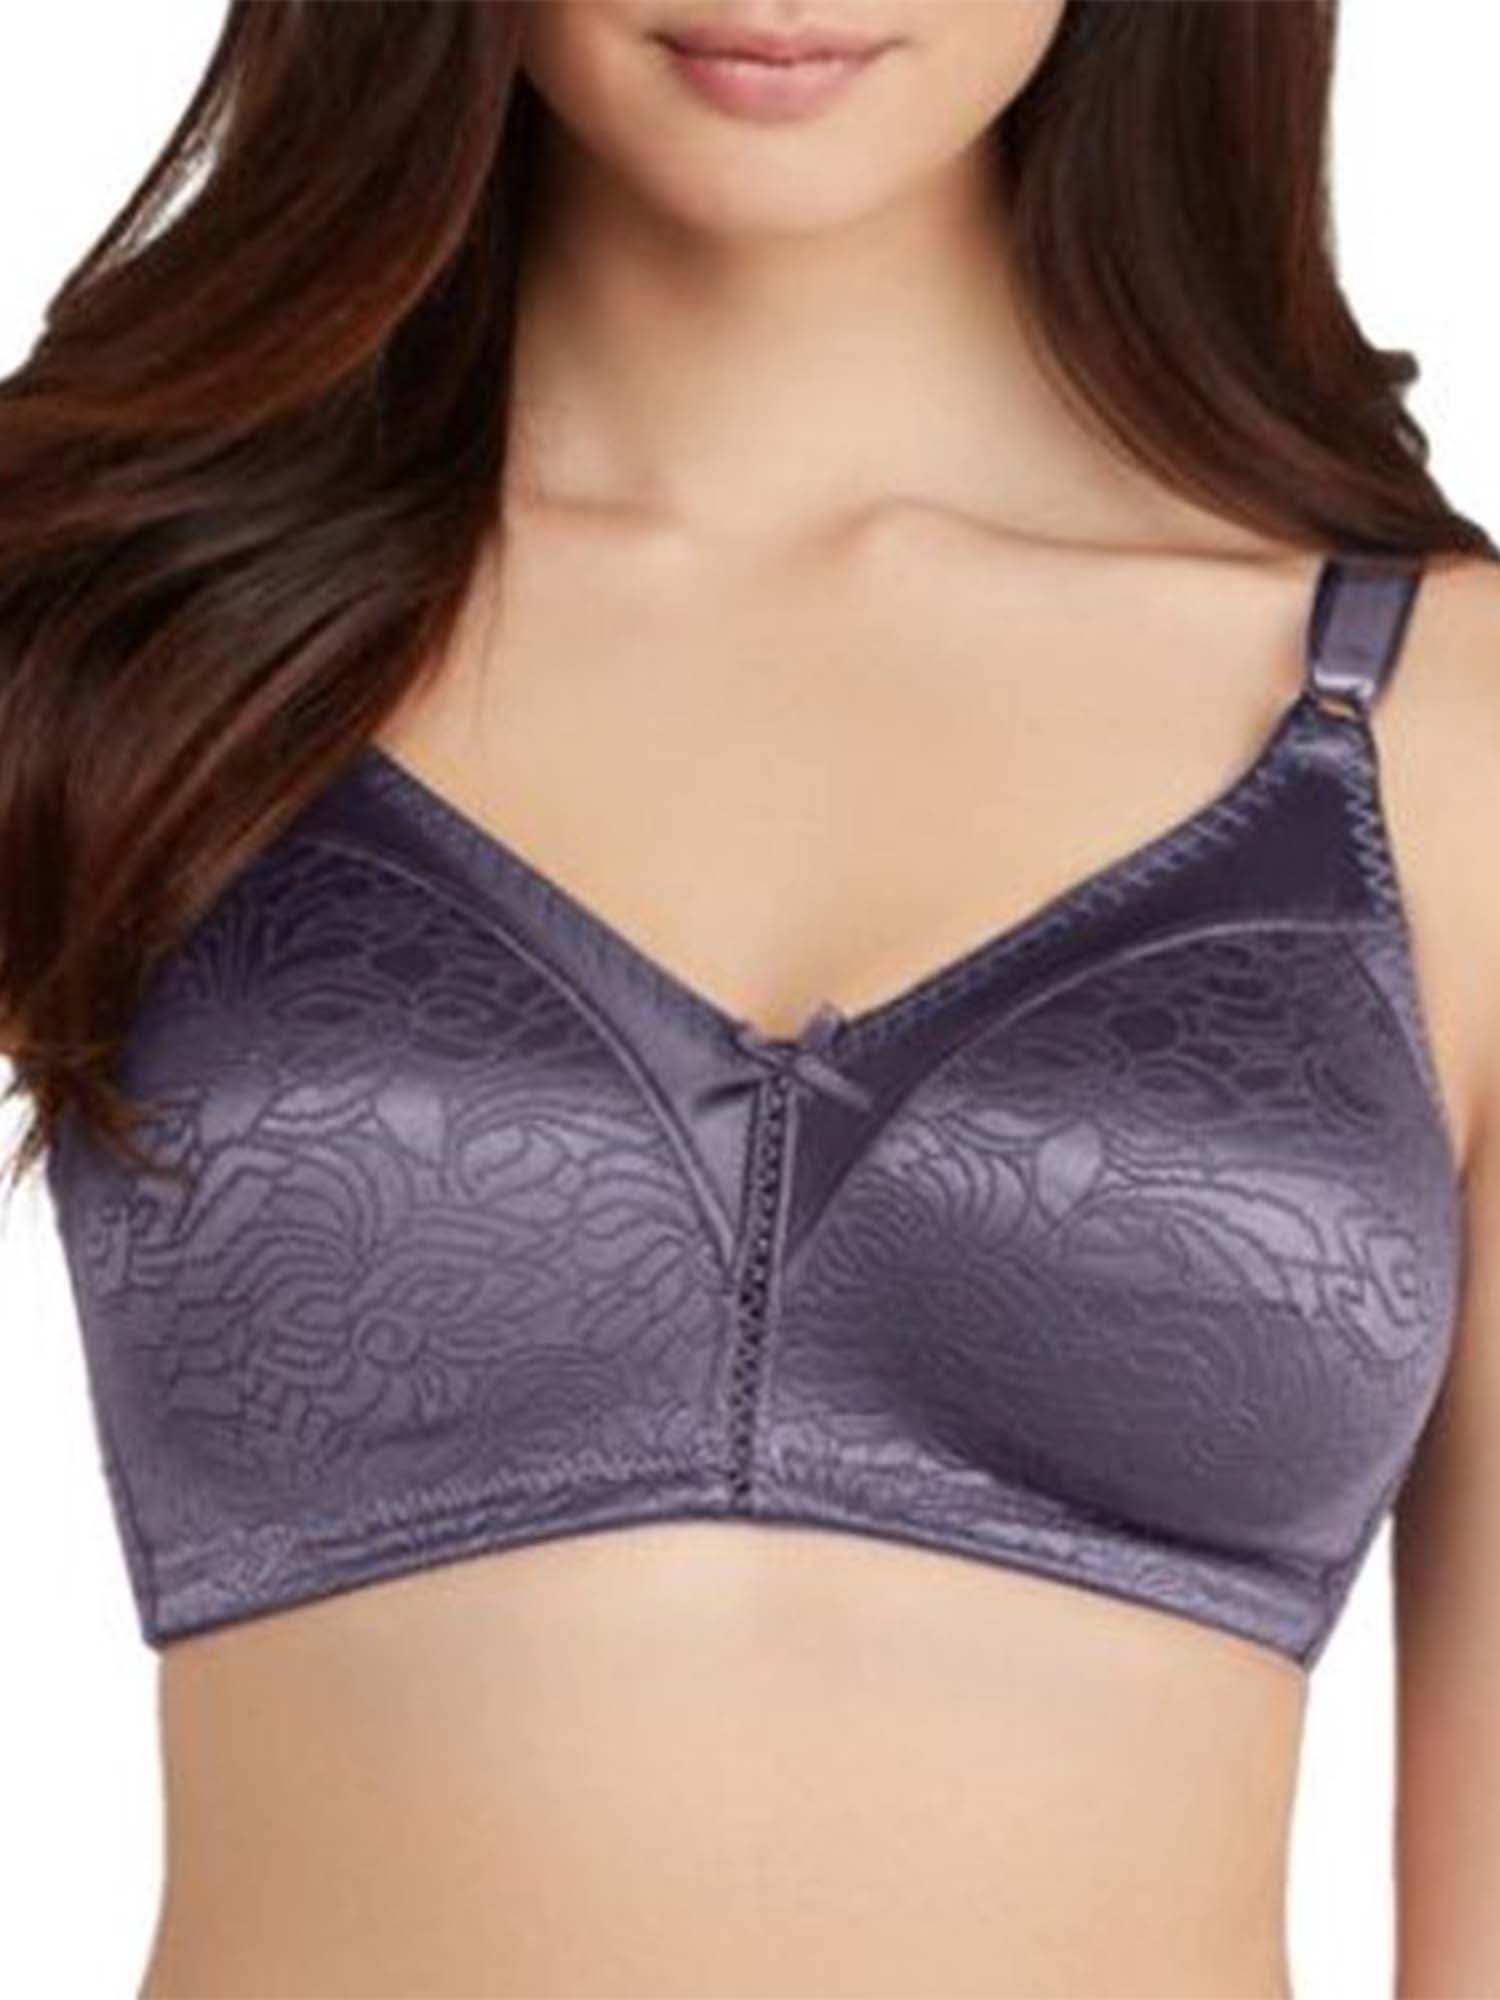 privatejet, 40b) - Women's Double Support Lace Wirefree Bra, Style 3372.  Bali